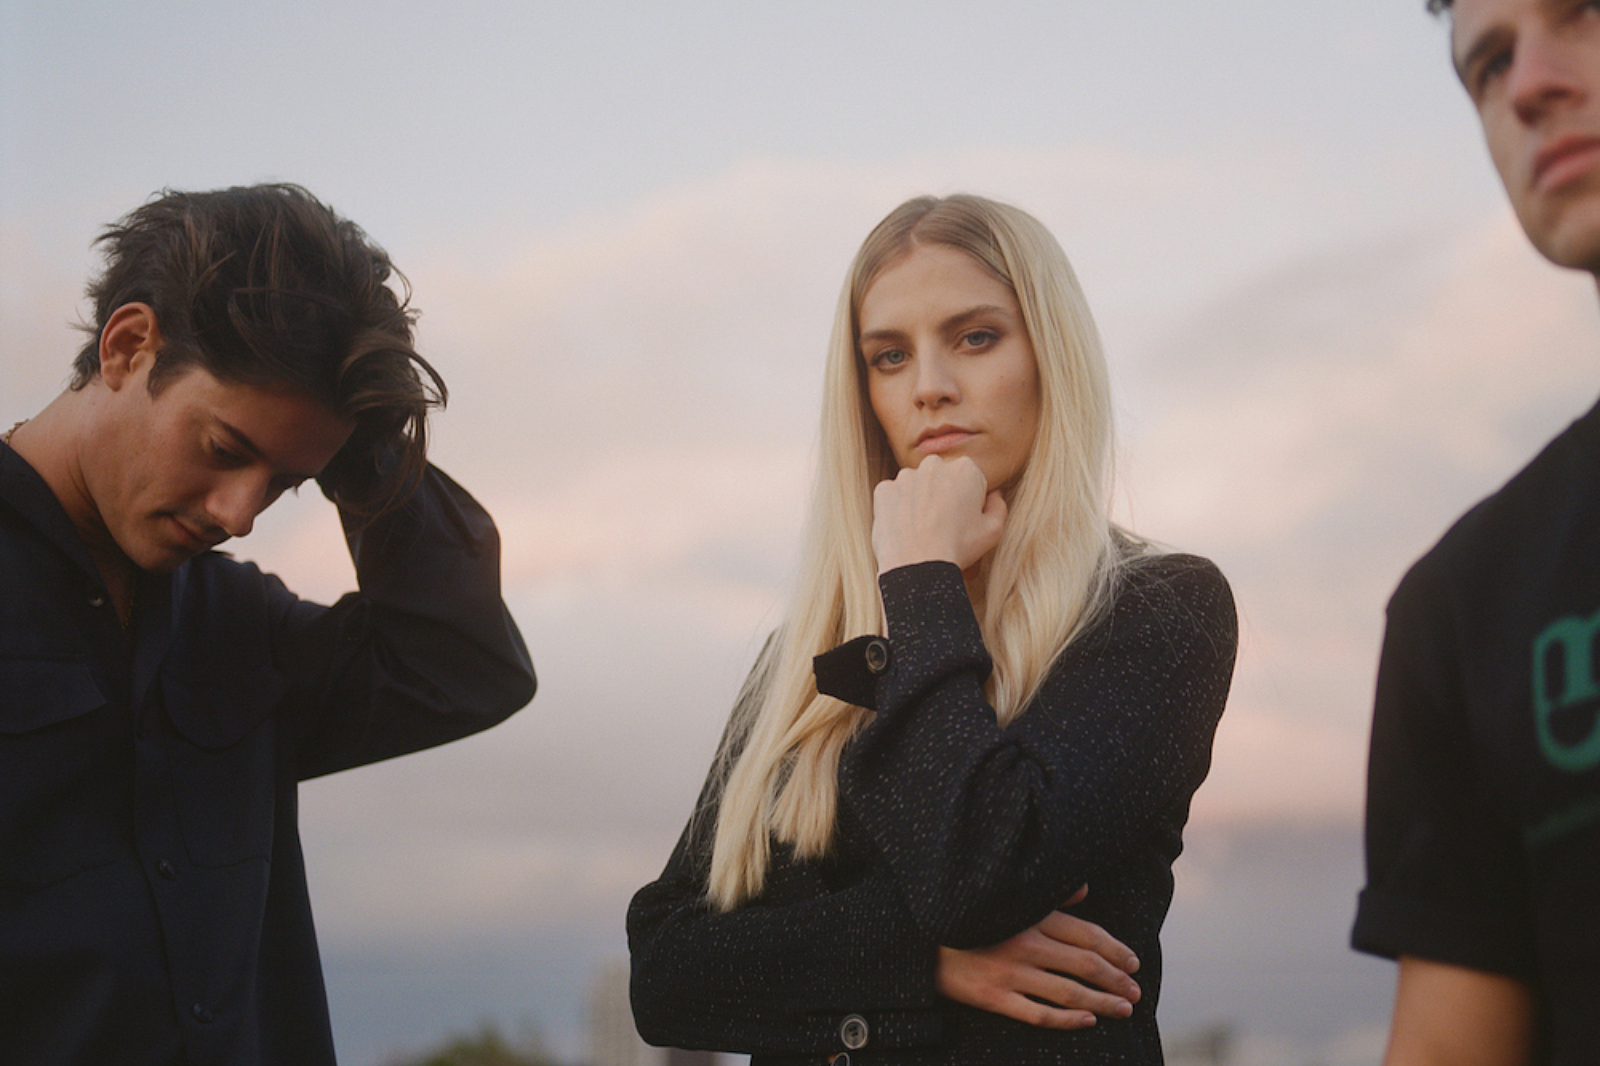 London Grammar and Jorja Smith to play All Points East